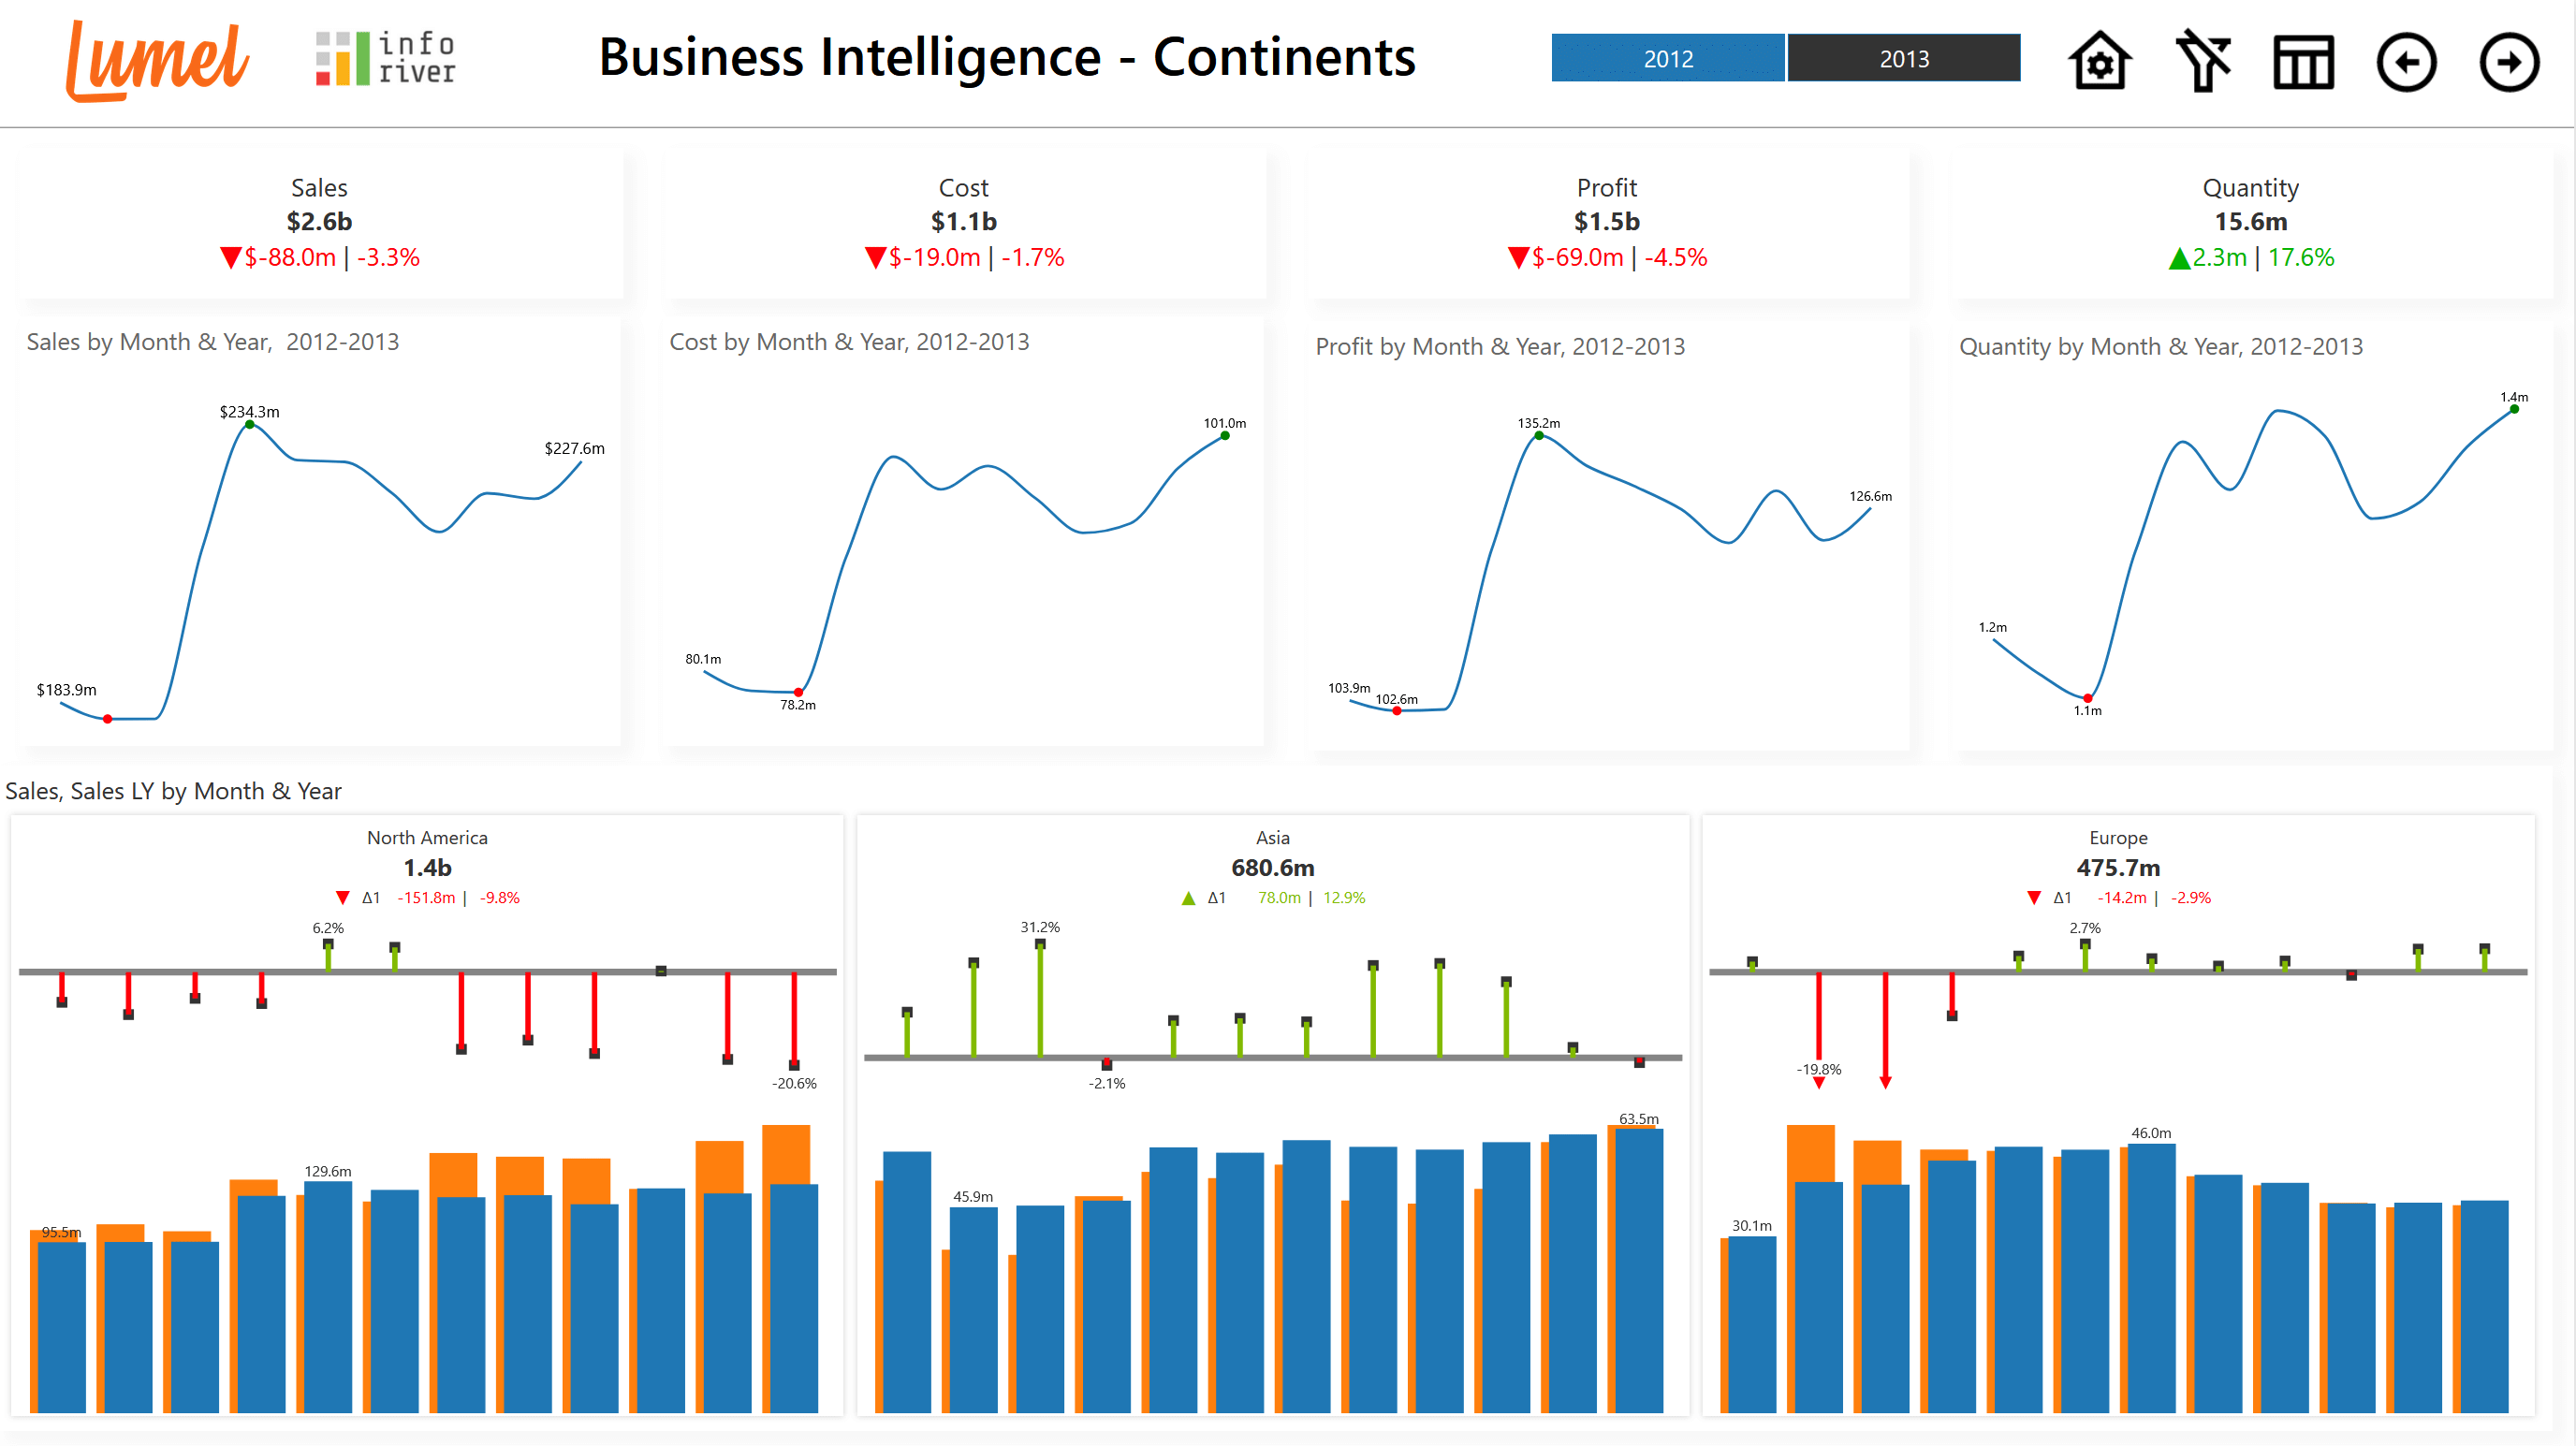 Sales analysis by continents and brands